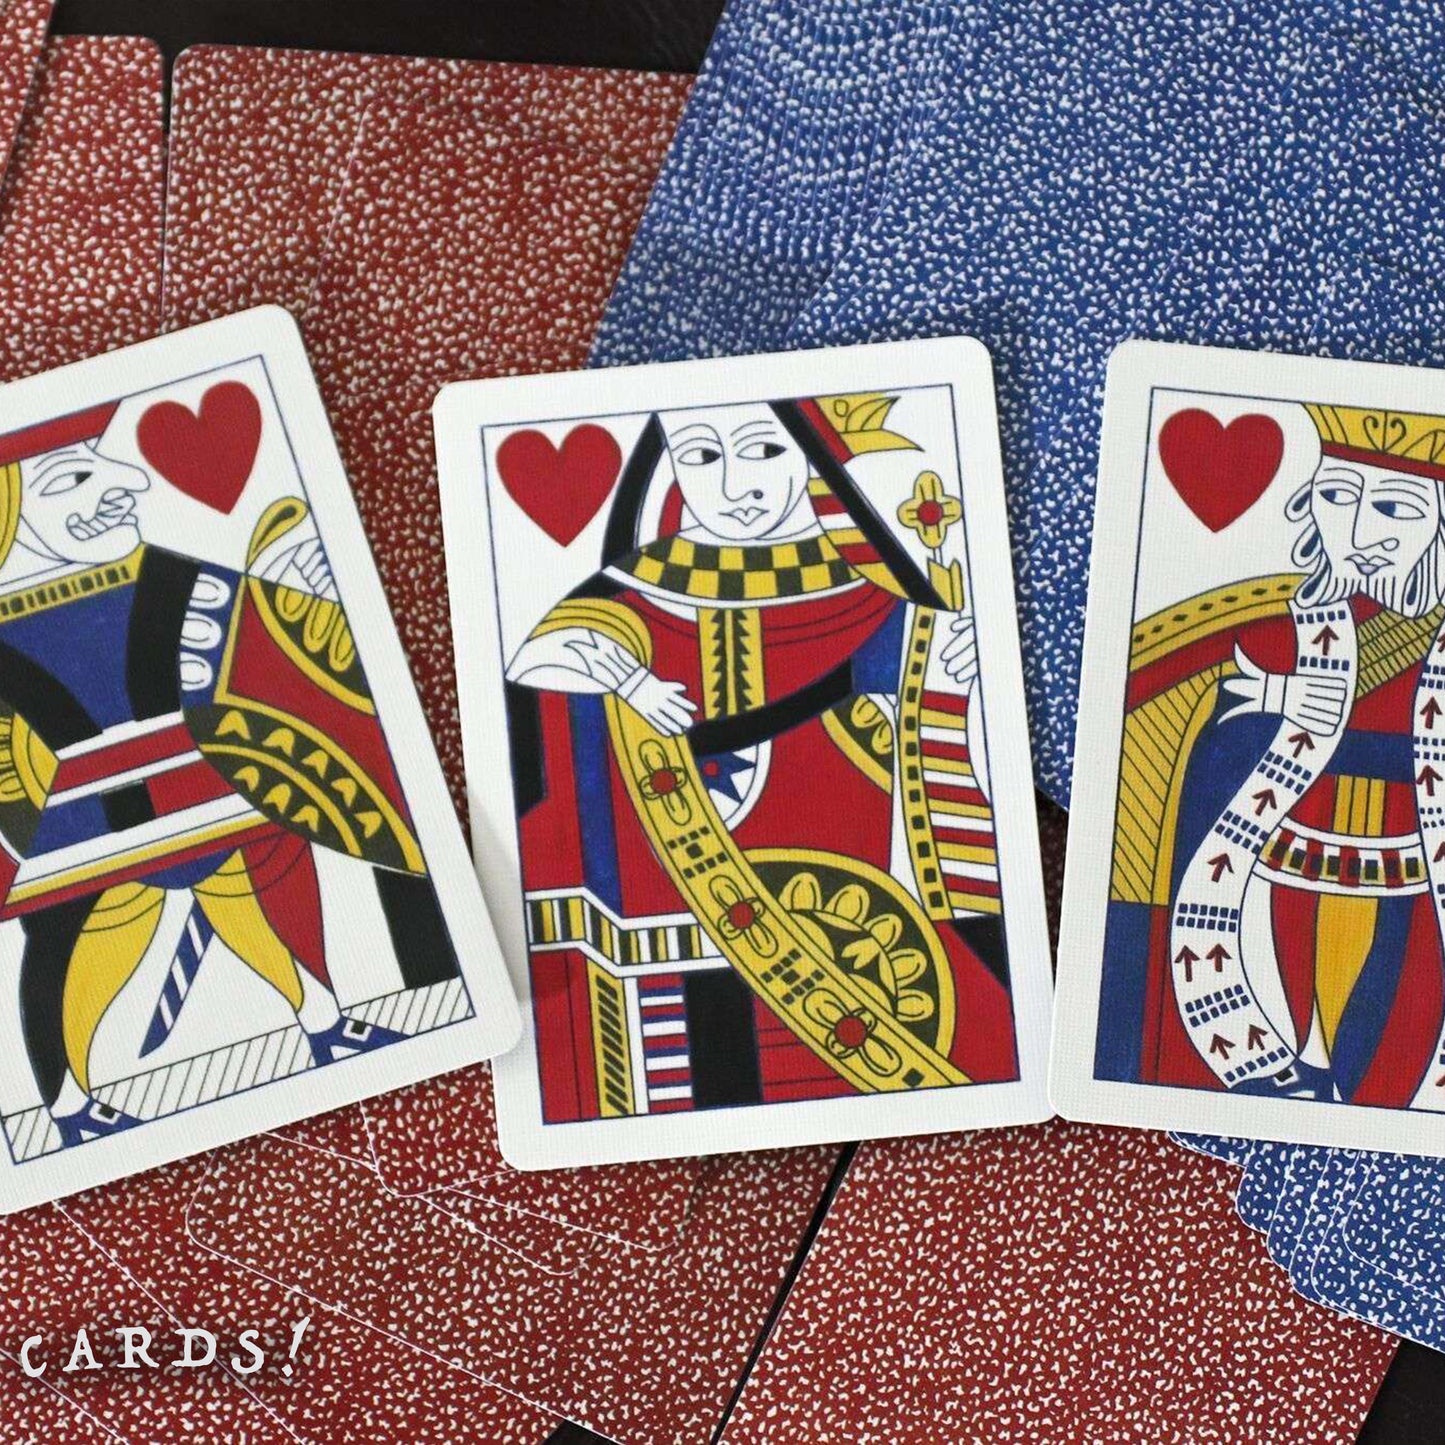 Limited Late 19th Century Square Faro Playing Cards (Snowflake Back)